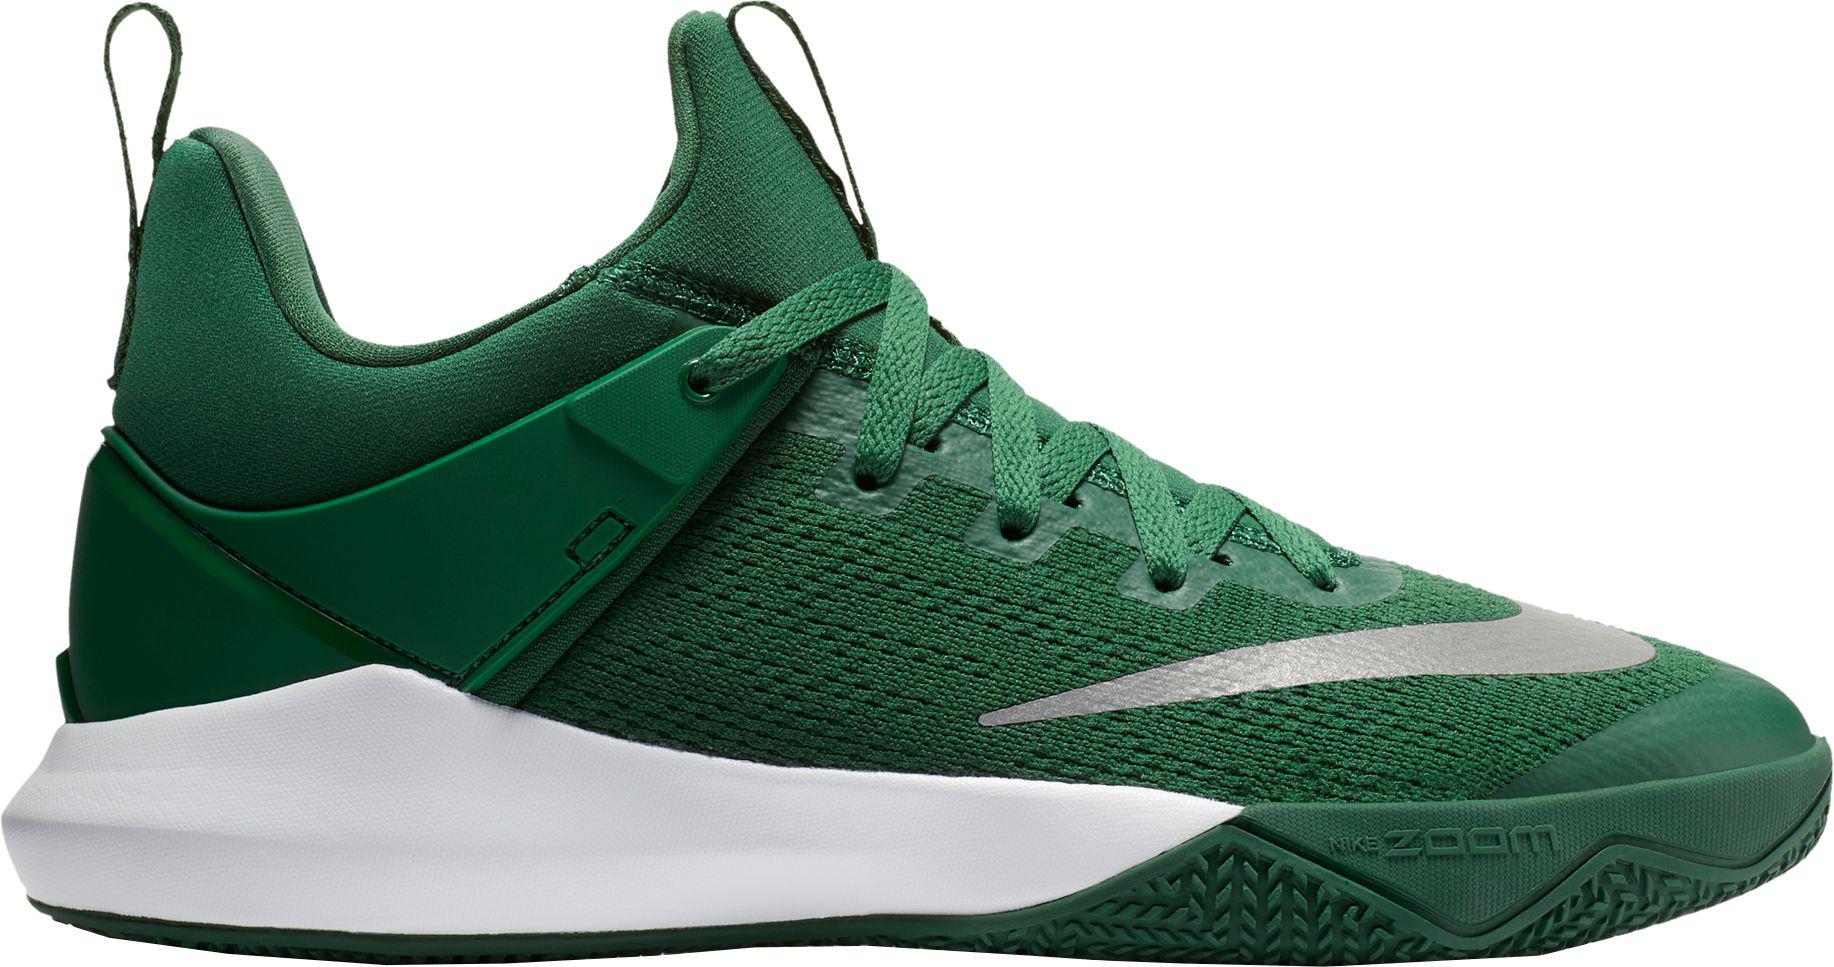 Lyst Nike Zoom Shift Tb Basketball Shoes in Green for Men